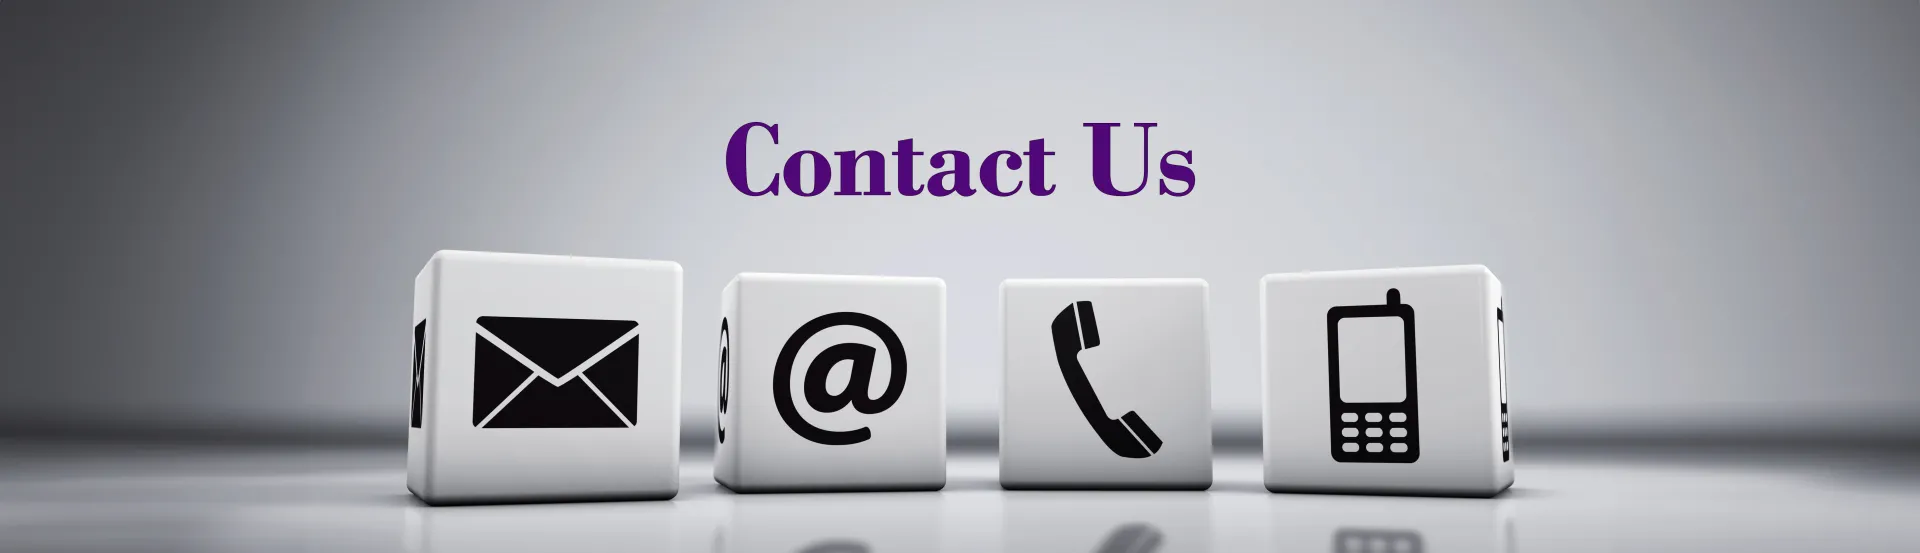 contact us banner